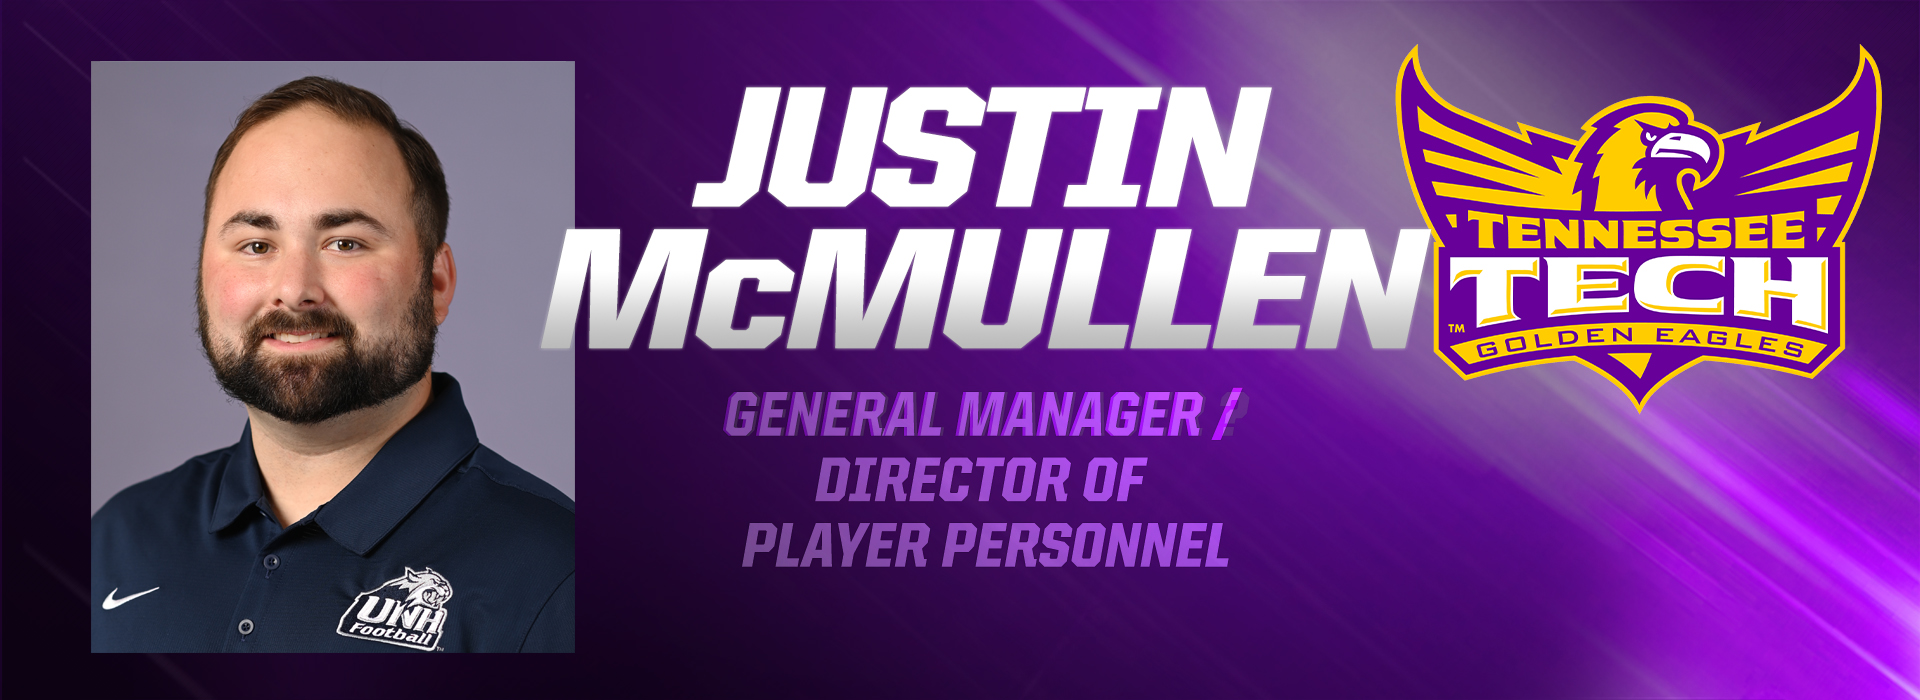 McMullen added to Tech football staff as GM/Director of Player Personnel